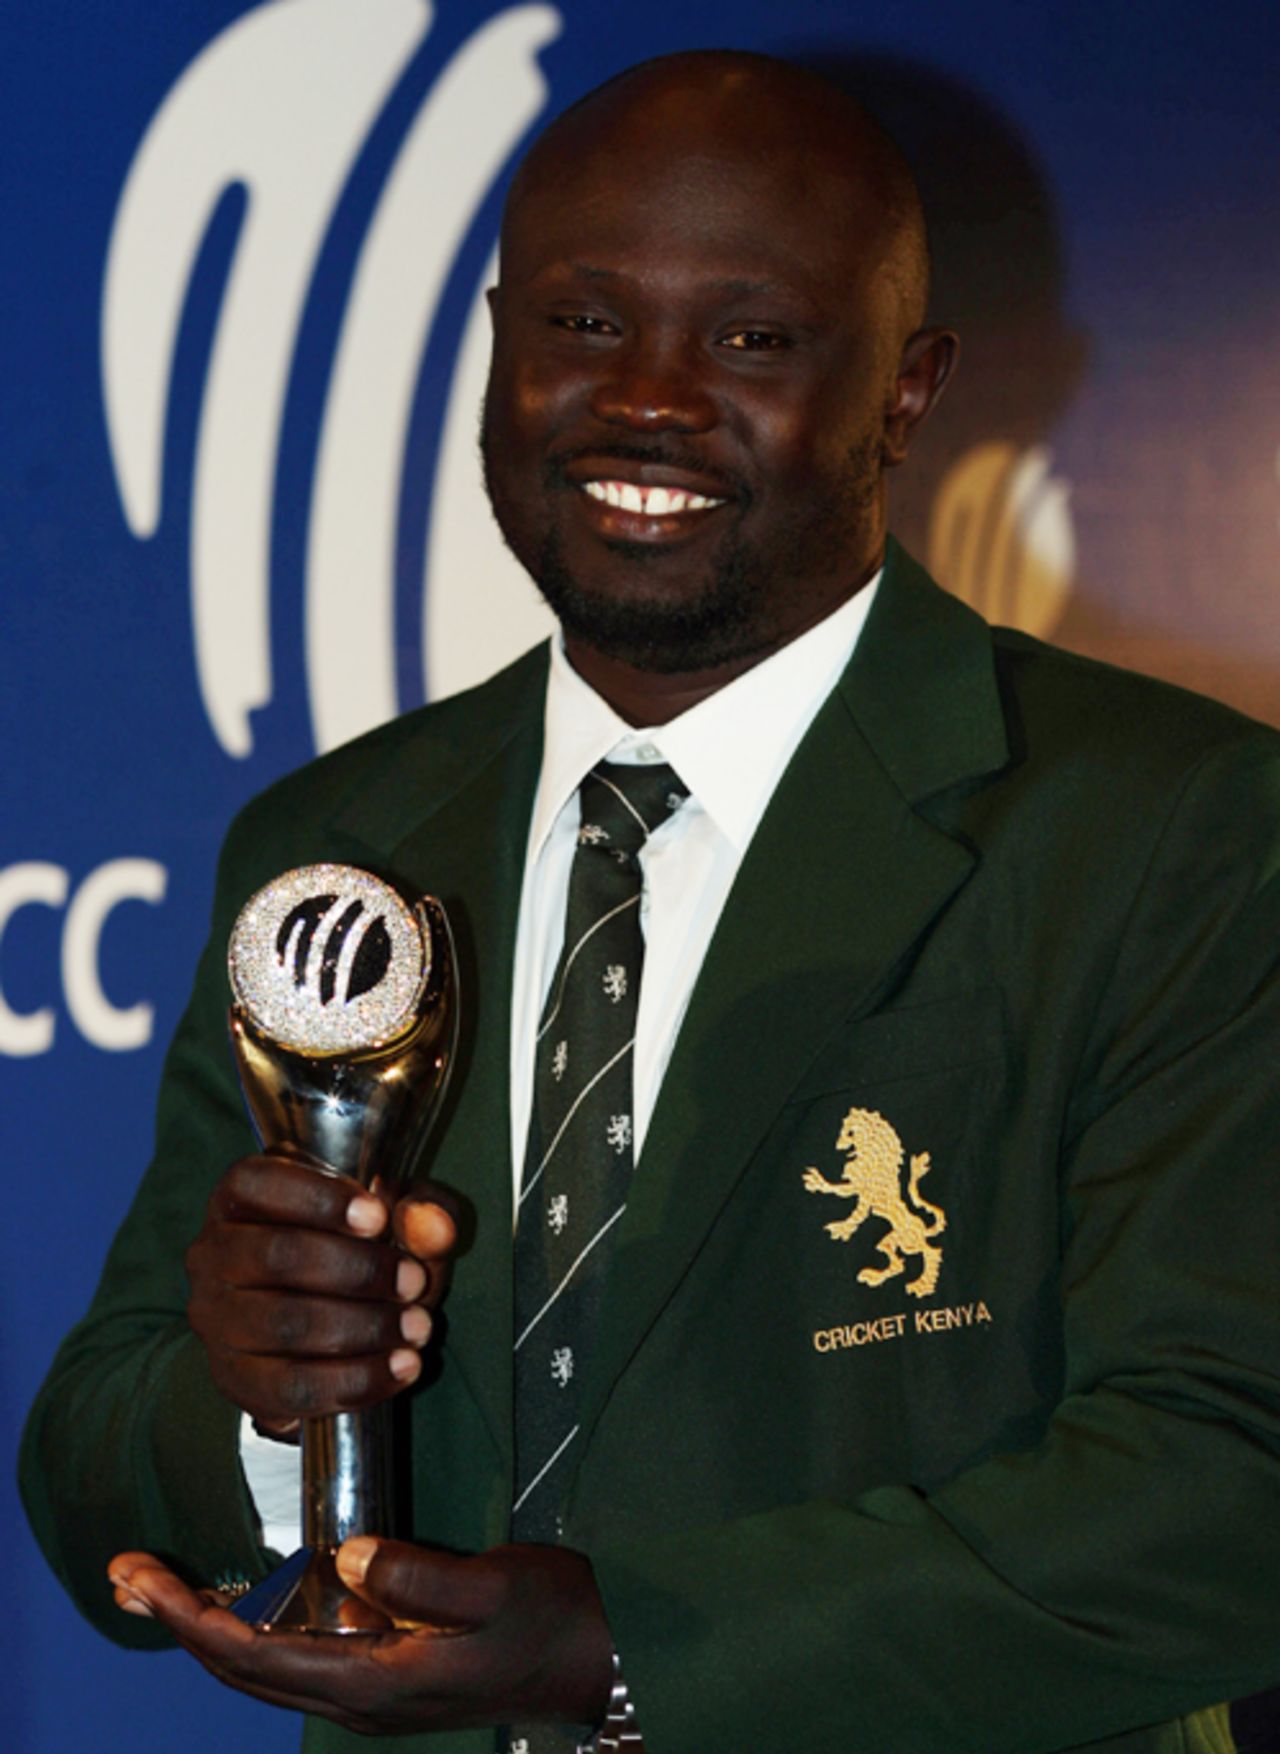 Thomas Odoyo, the ICC's Associate Player of the Year for 2007, Johannesburg, September 10, 2007